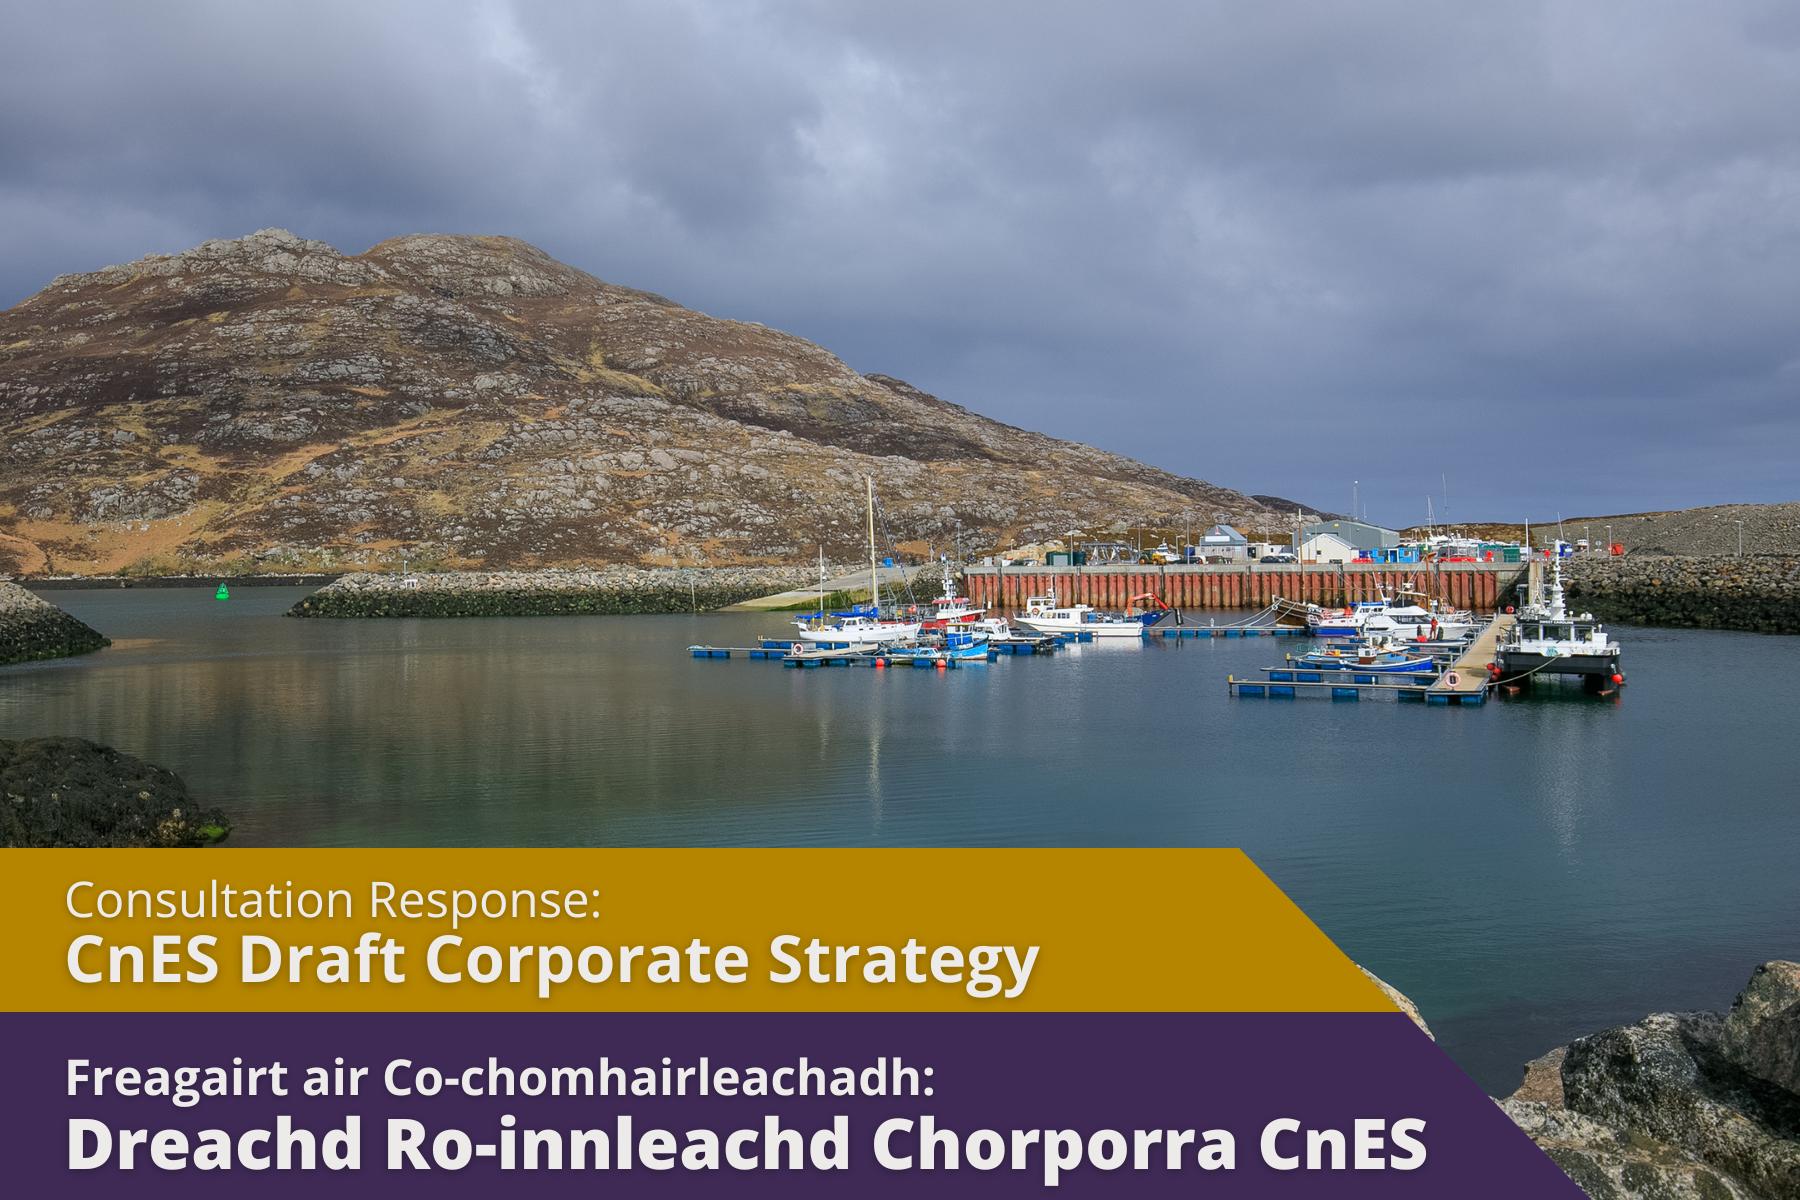 Consultation Response: CnES Draft Corporate Strategy